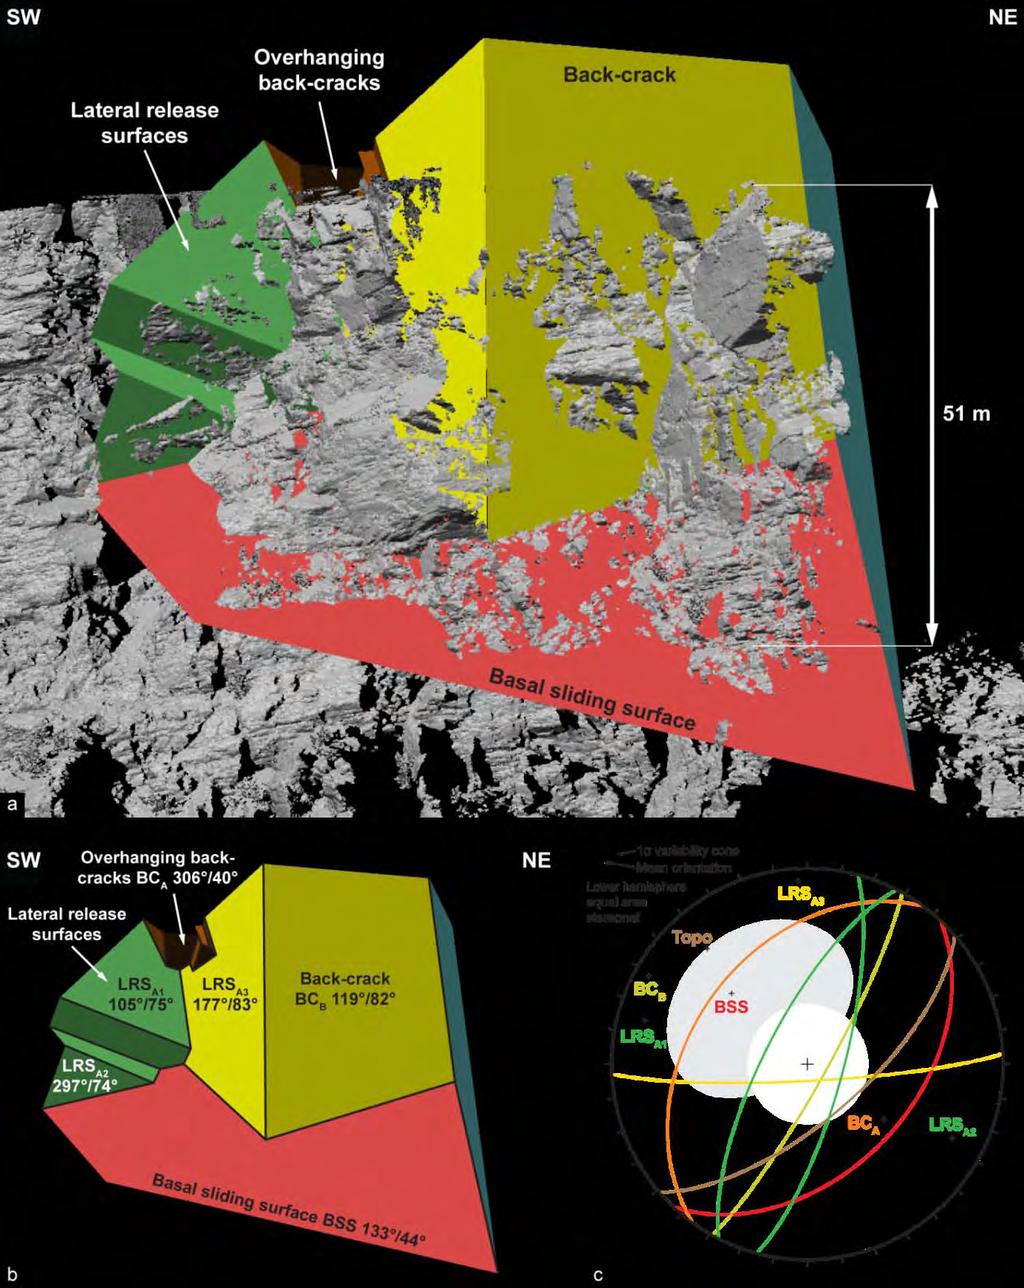 Figure 3: Construction of the basal failure surface for two unstable columns at Brosmebakktuva: a) TLS point cloud with the constructed limiting surfaces; b) model of the basal failure